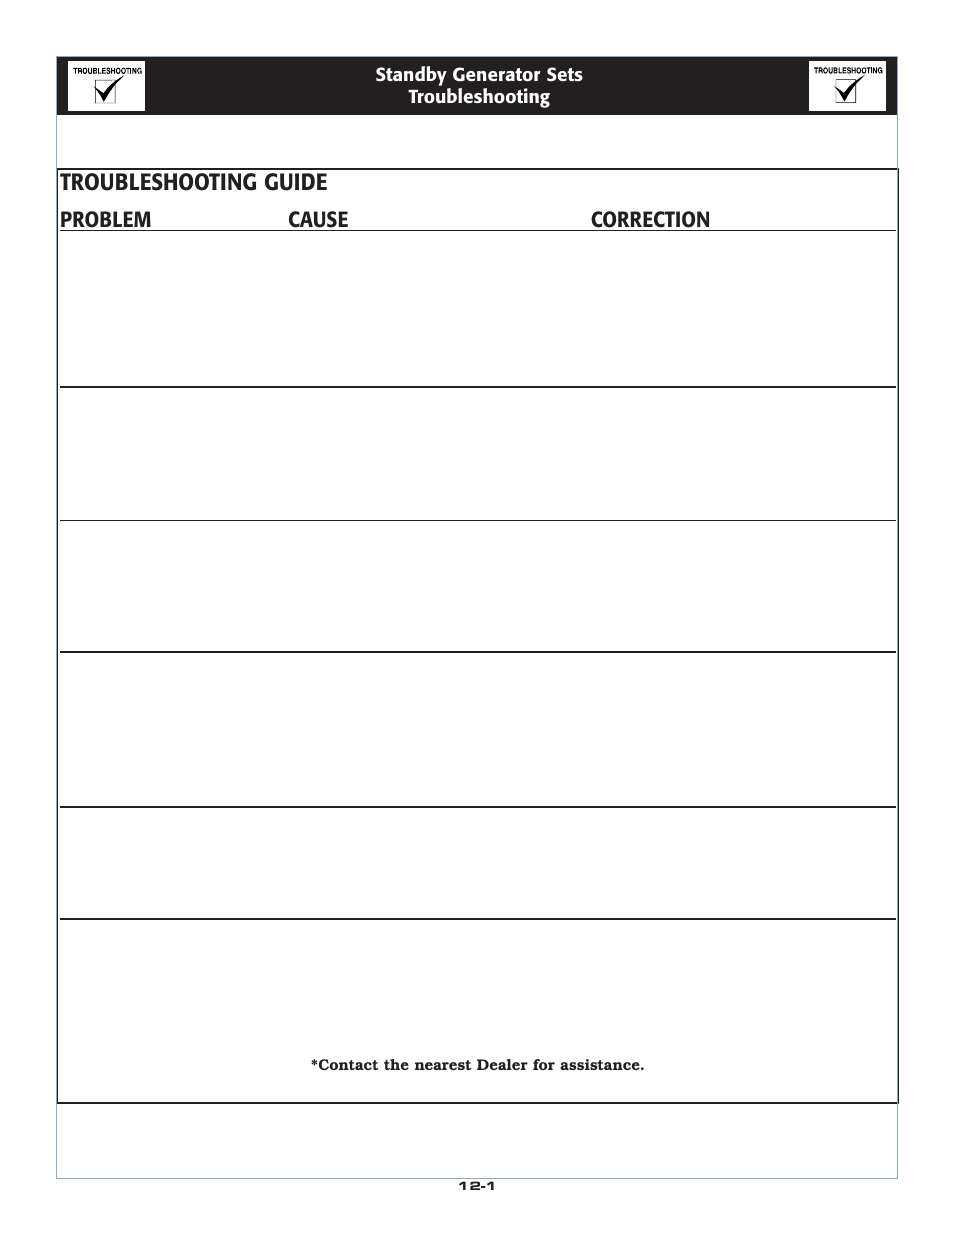 Troubleshooting guide, Problem cause correction | LG 30kW User Manual | Page 23 / 60